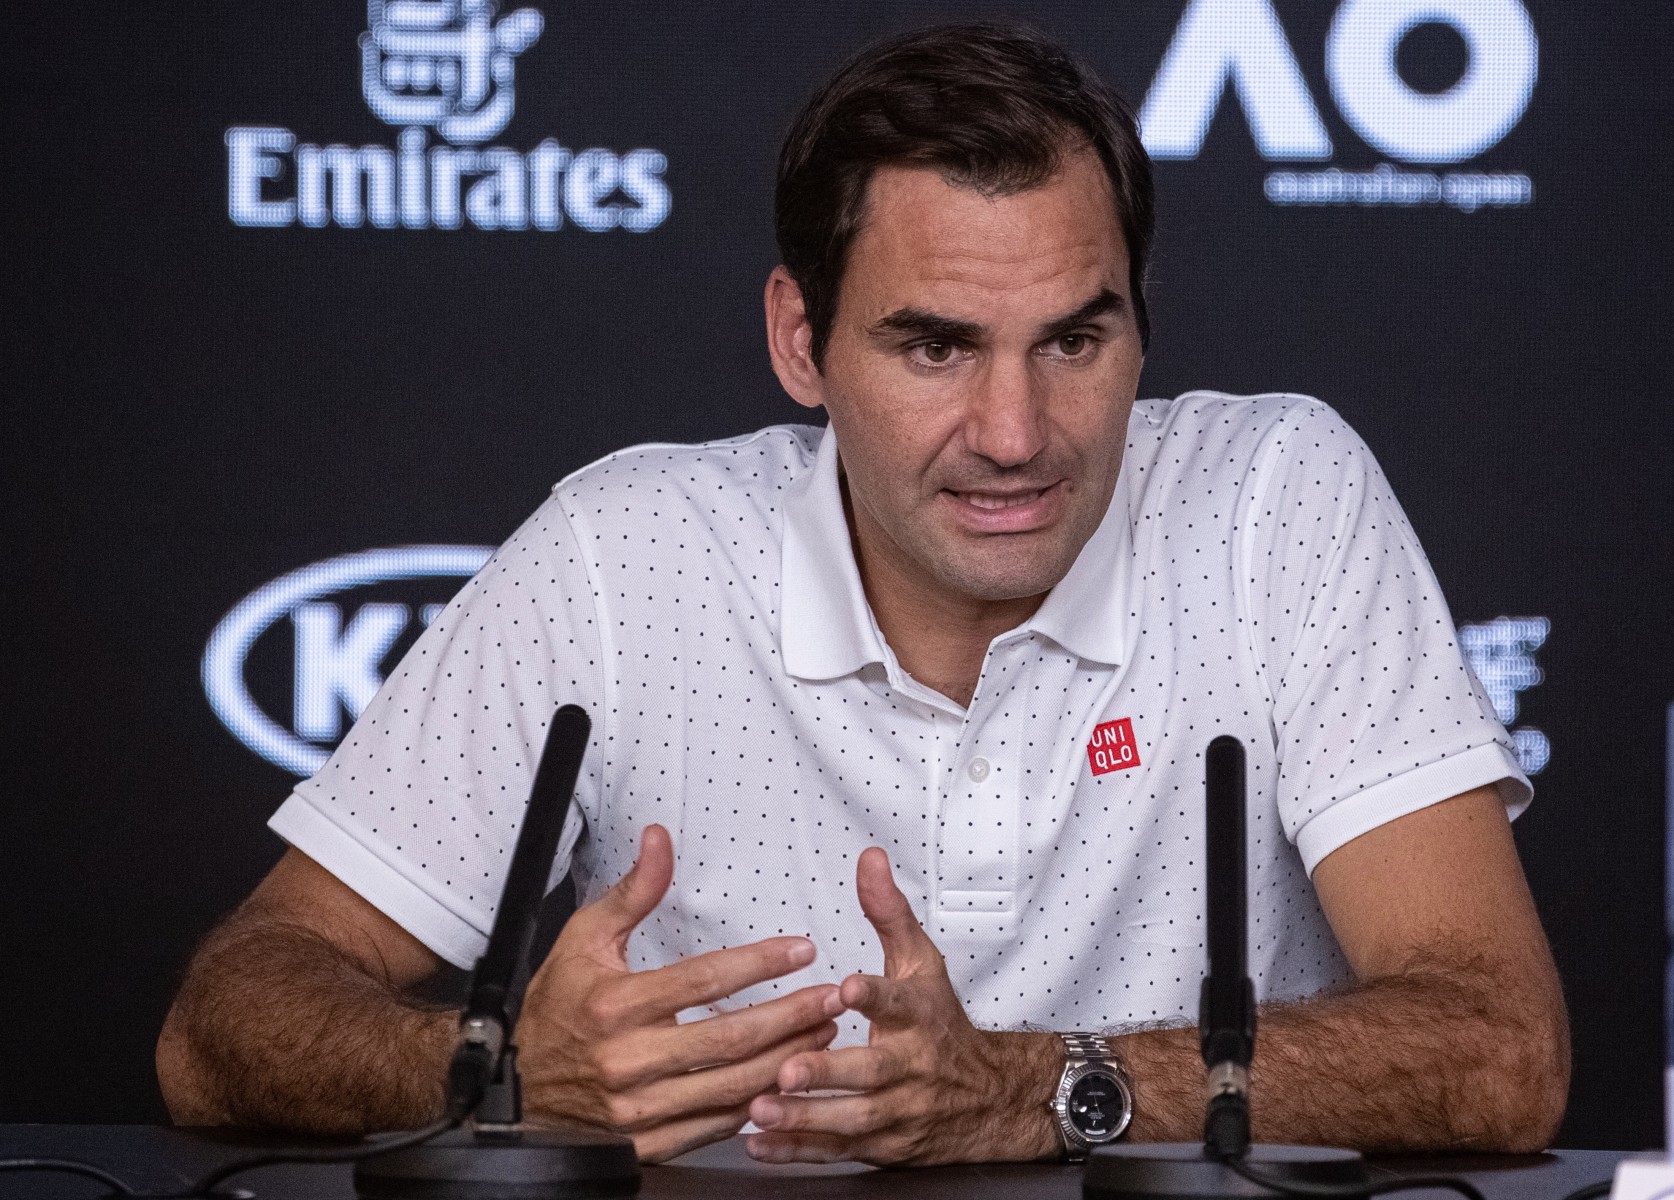 , Roger Federer responds to selfish bushfire criticism, saying he cares about lower-ranked stars